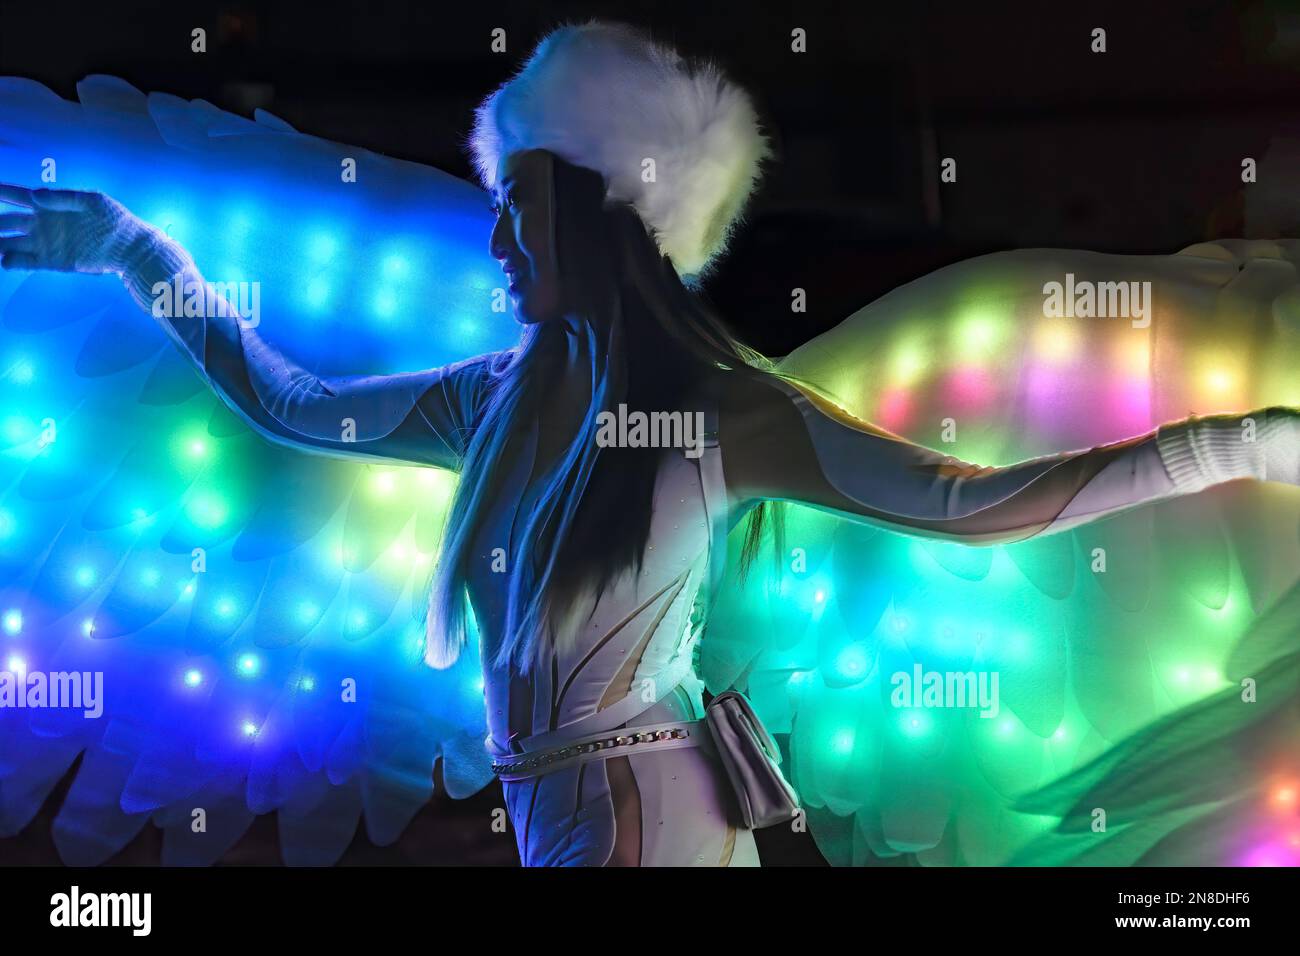 Young Asian girl wearing angel wings at the Chinook Blast Winter Festival, Calgary Alberta Canada Stock Photo